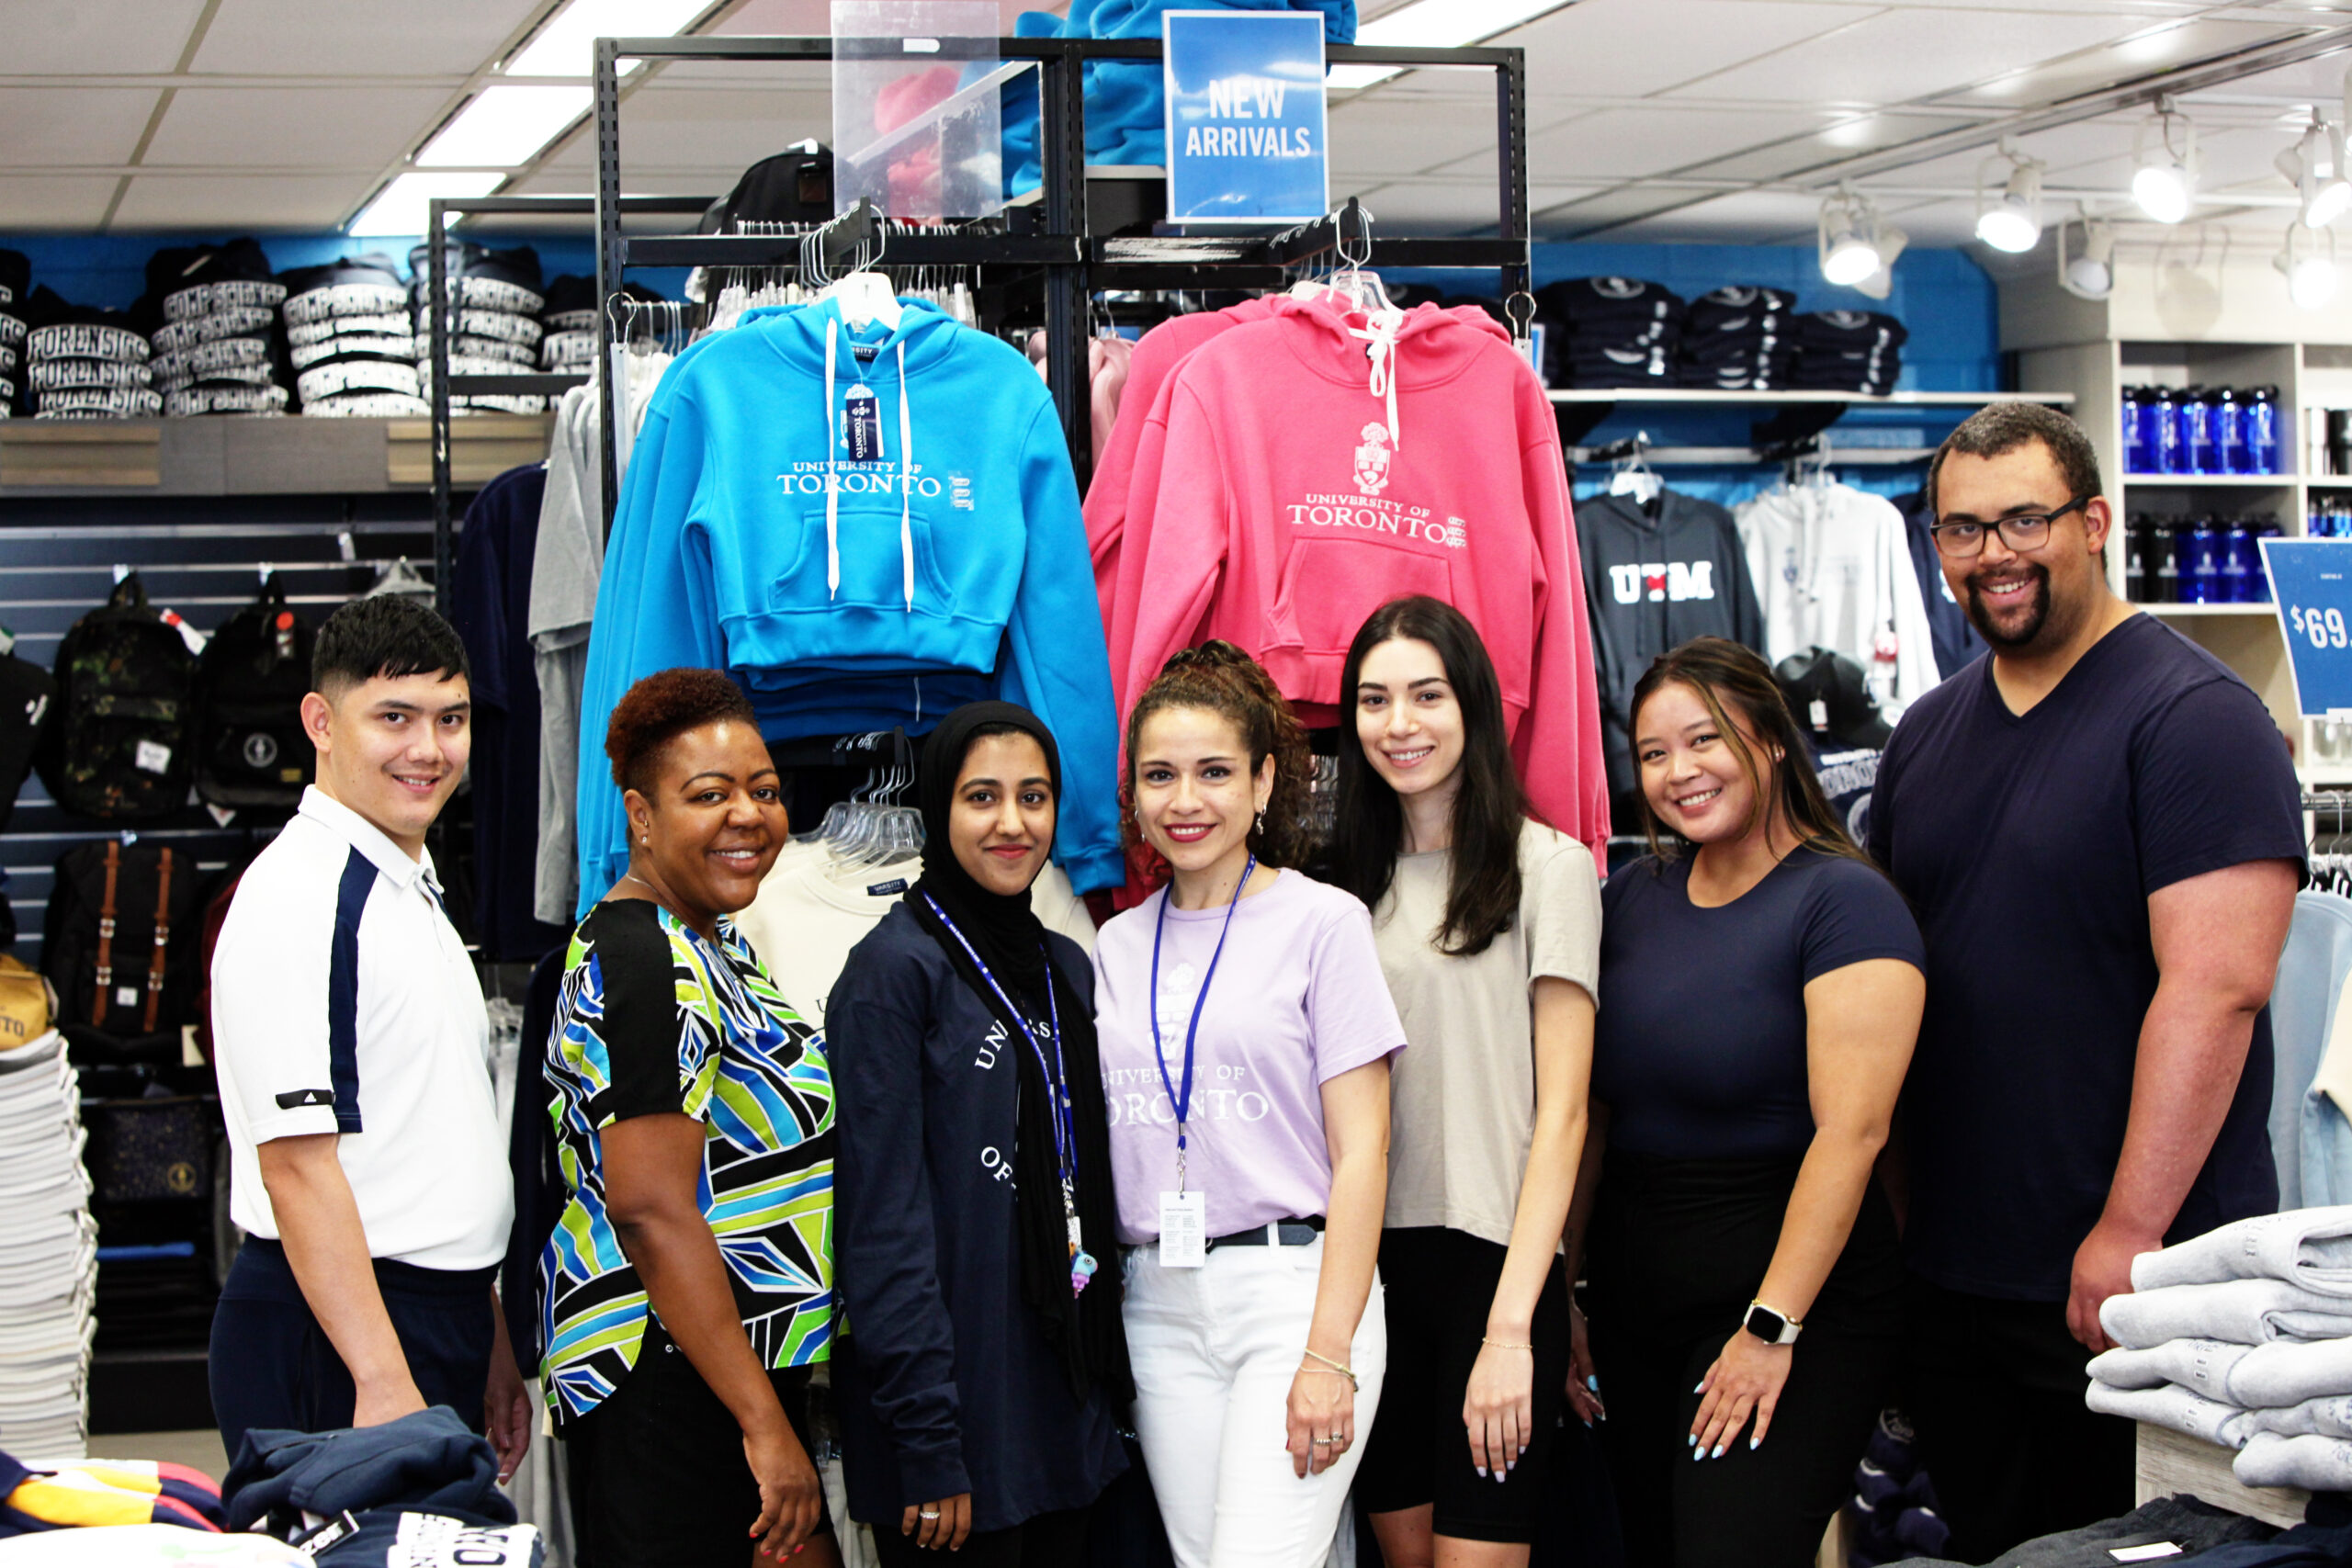 Students in Store